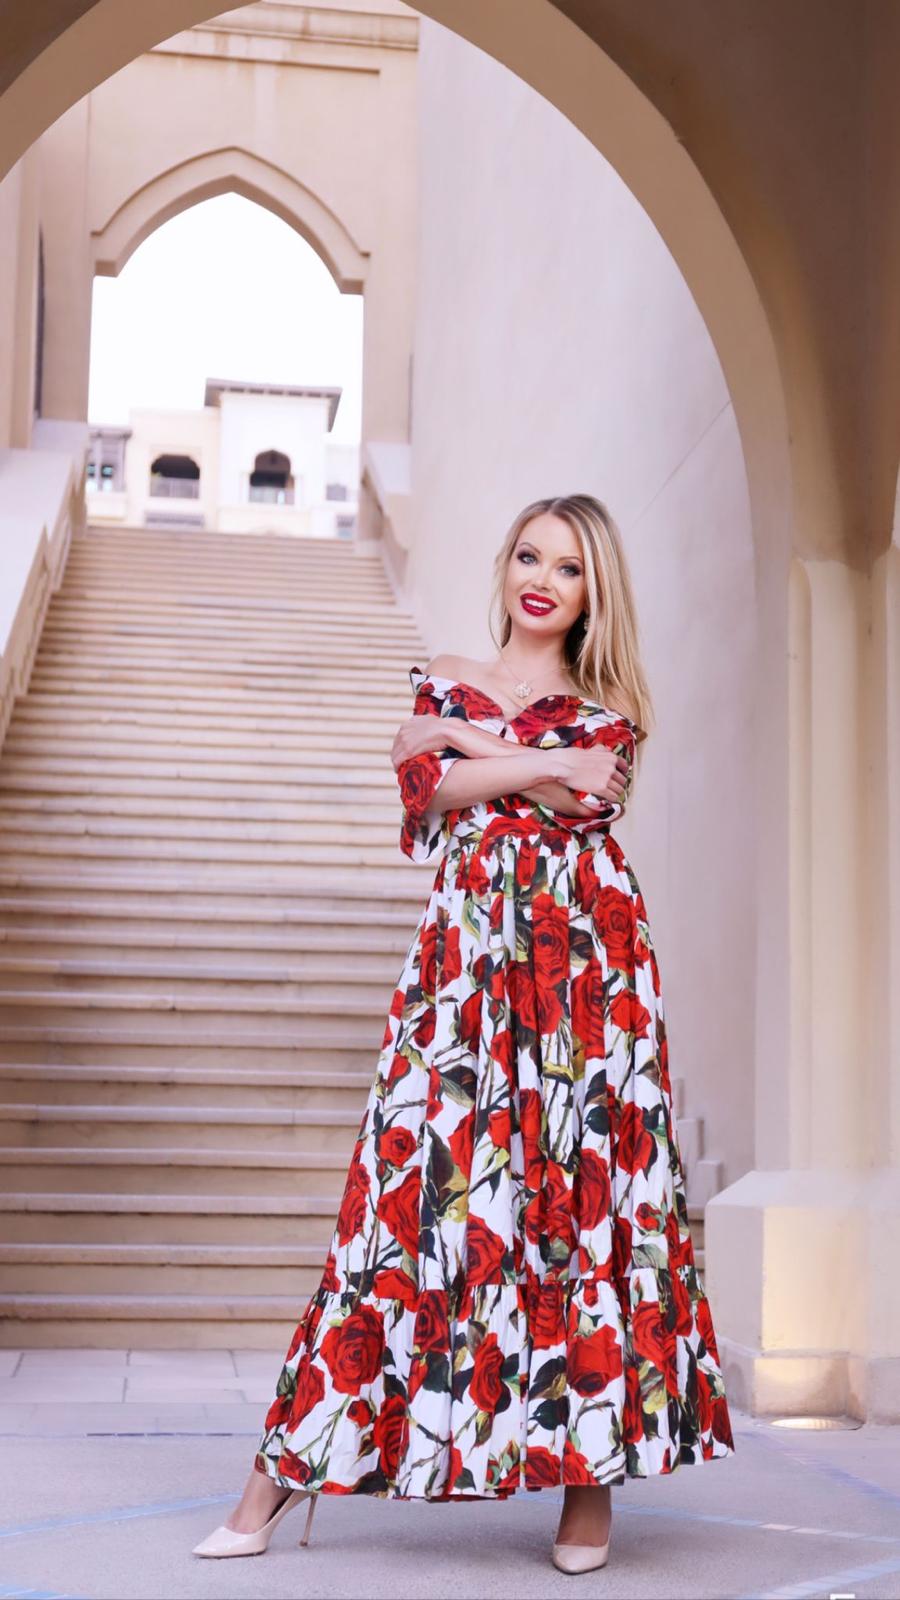 Joanna Bujoli standing infront of some stairs while wearing a large summer dress 